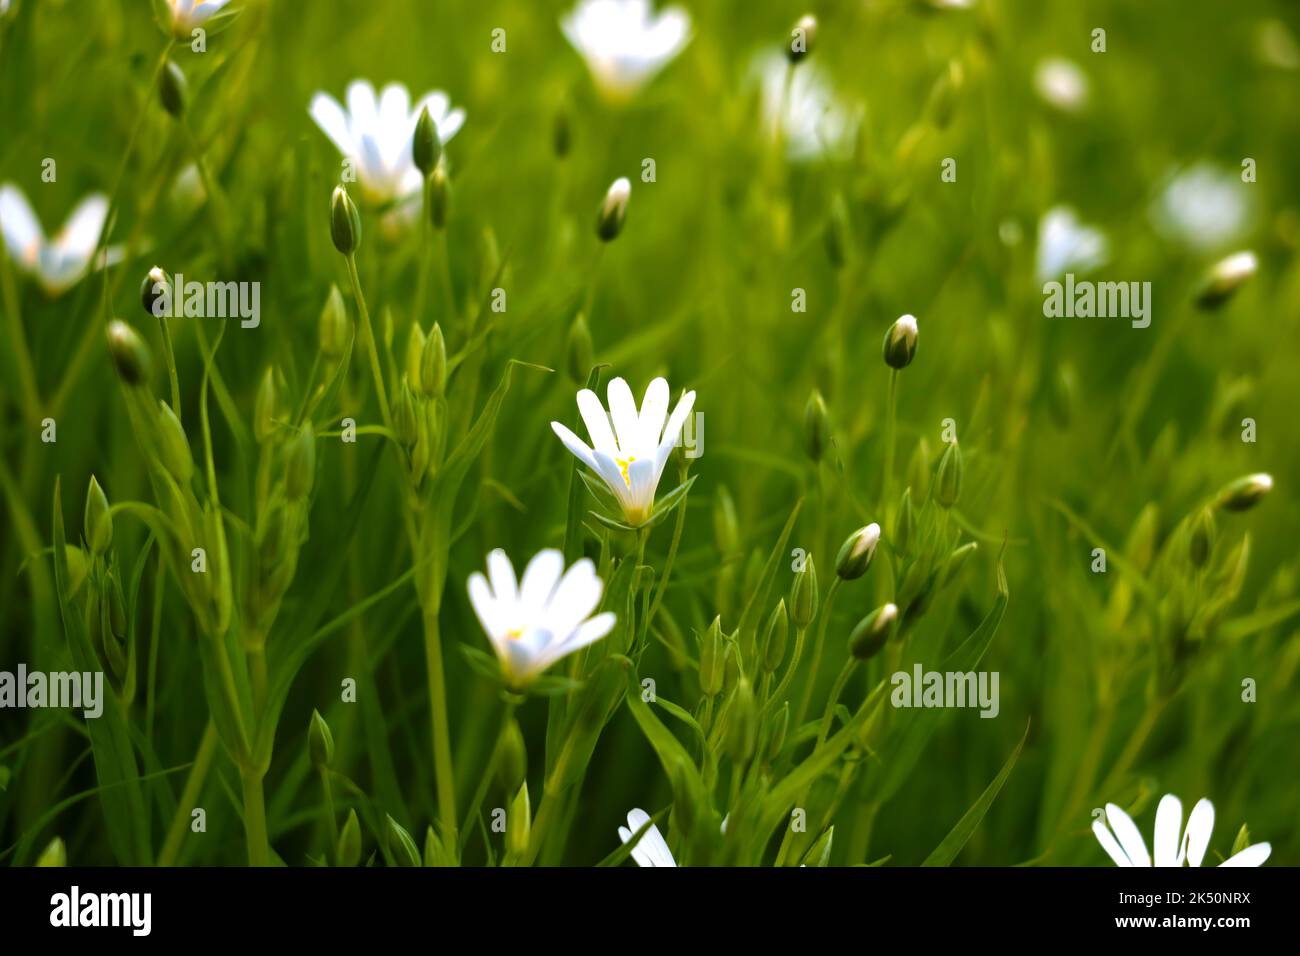 A closeup shot of delicate Meadow Starworts (Stellaria palustris) grown in a field Stock Photo